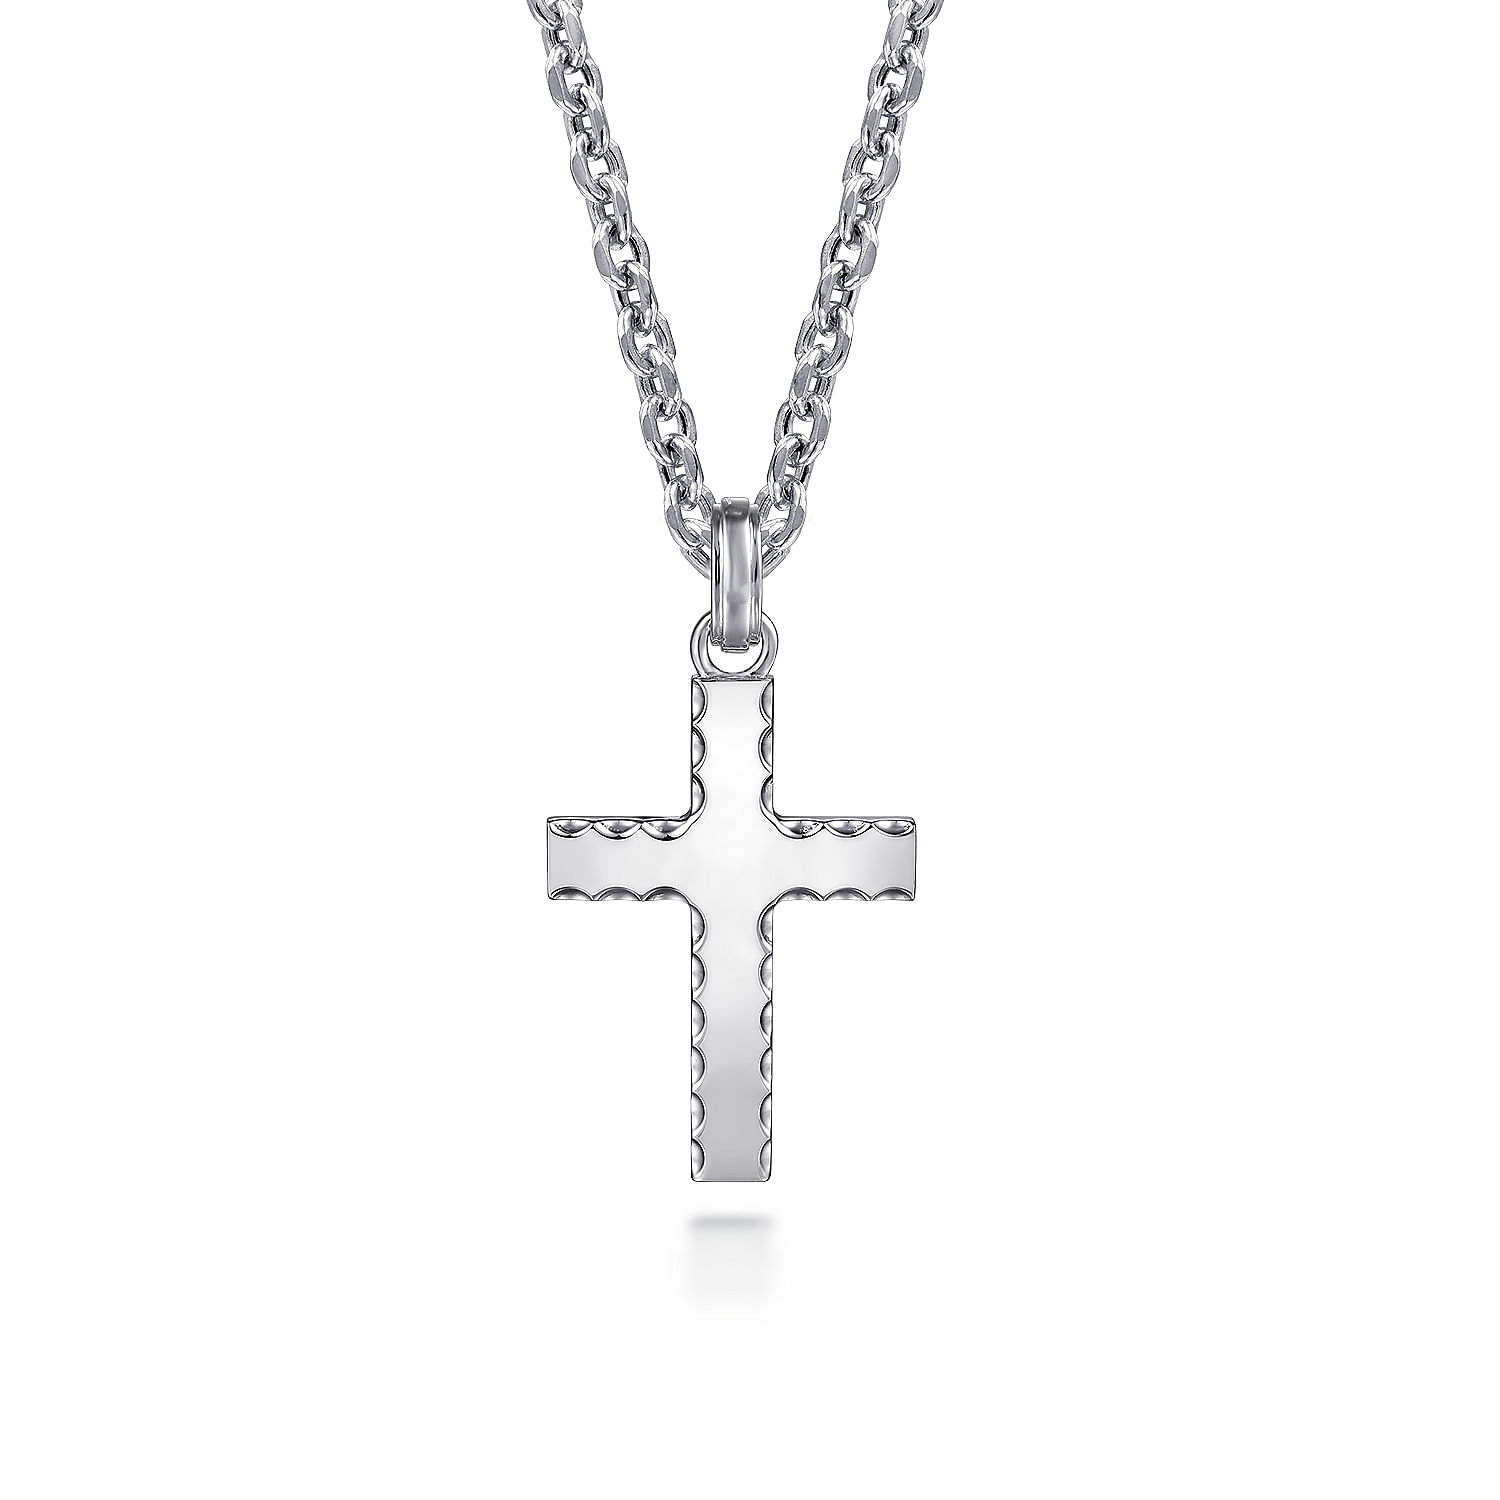 Gabriel - 22 Inch 925 Sterling Silver Cross Solid Link Chain Necklace with Beveled Trim